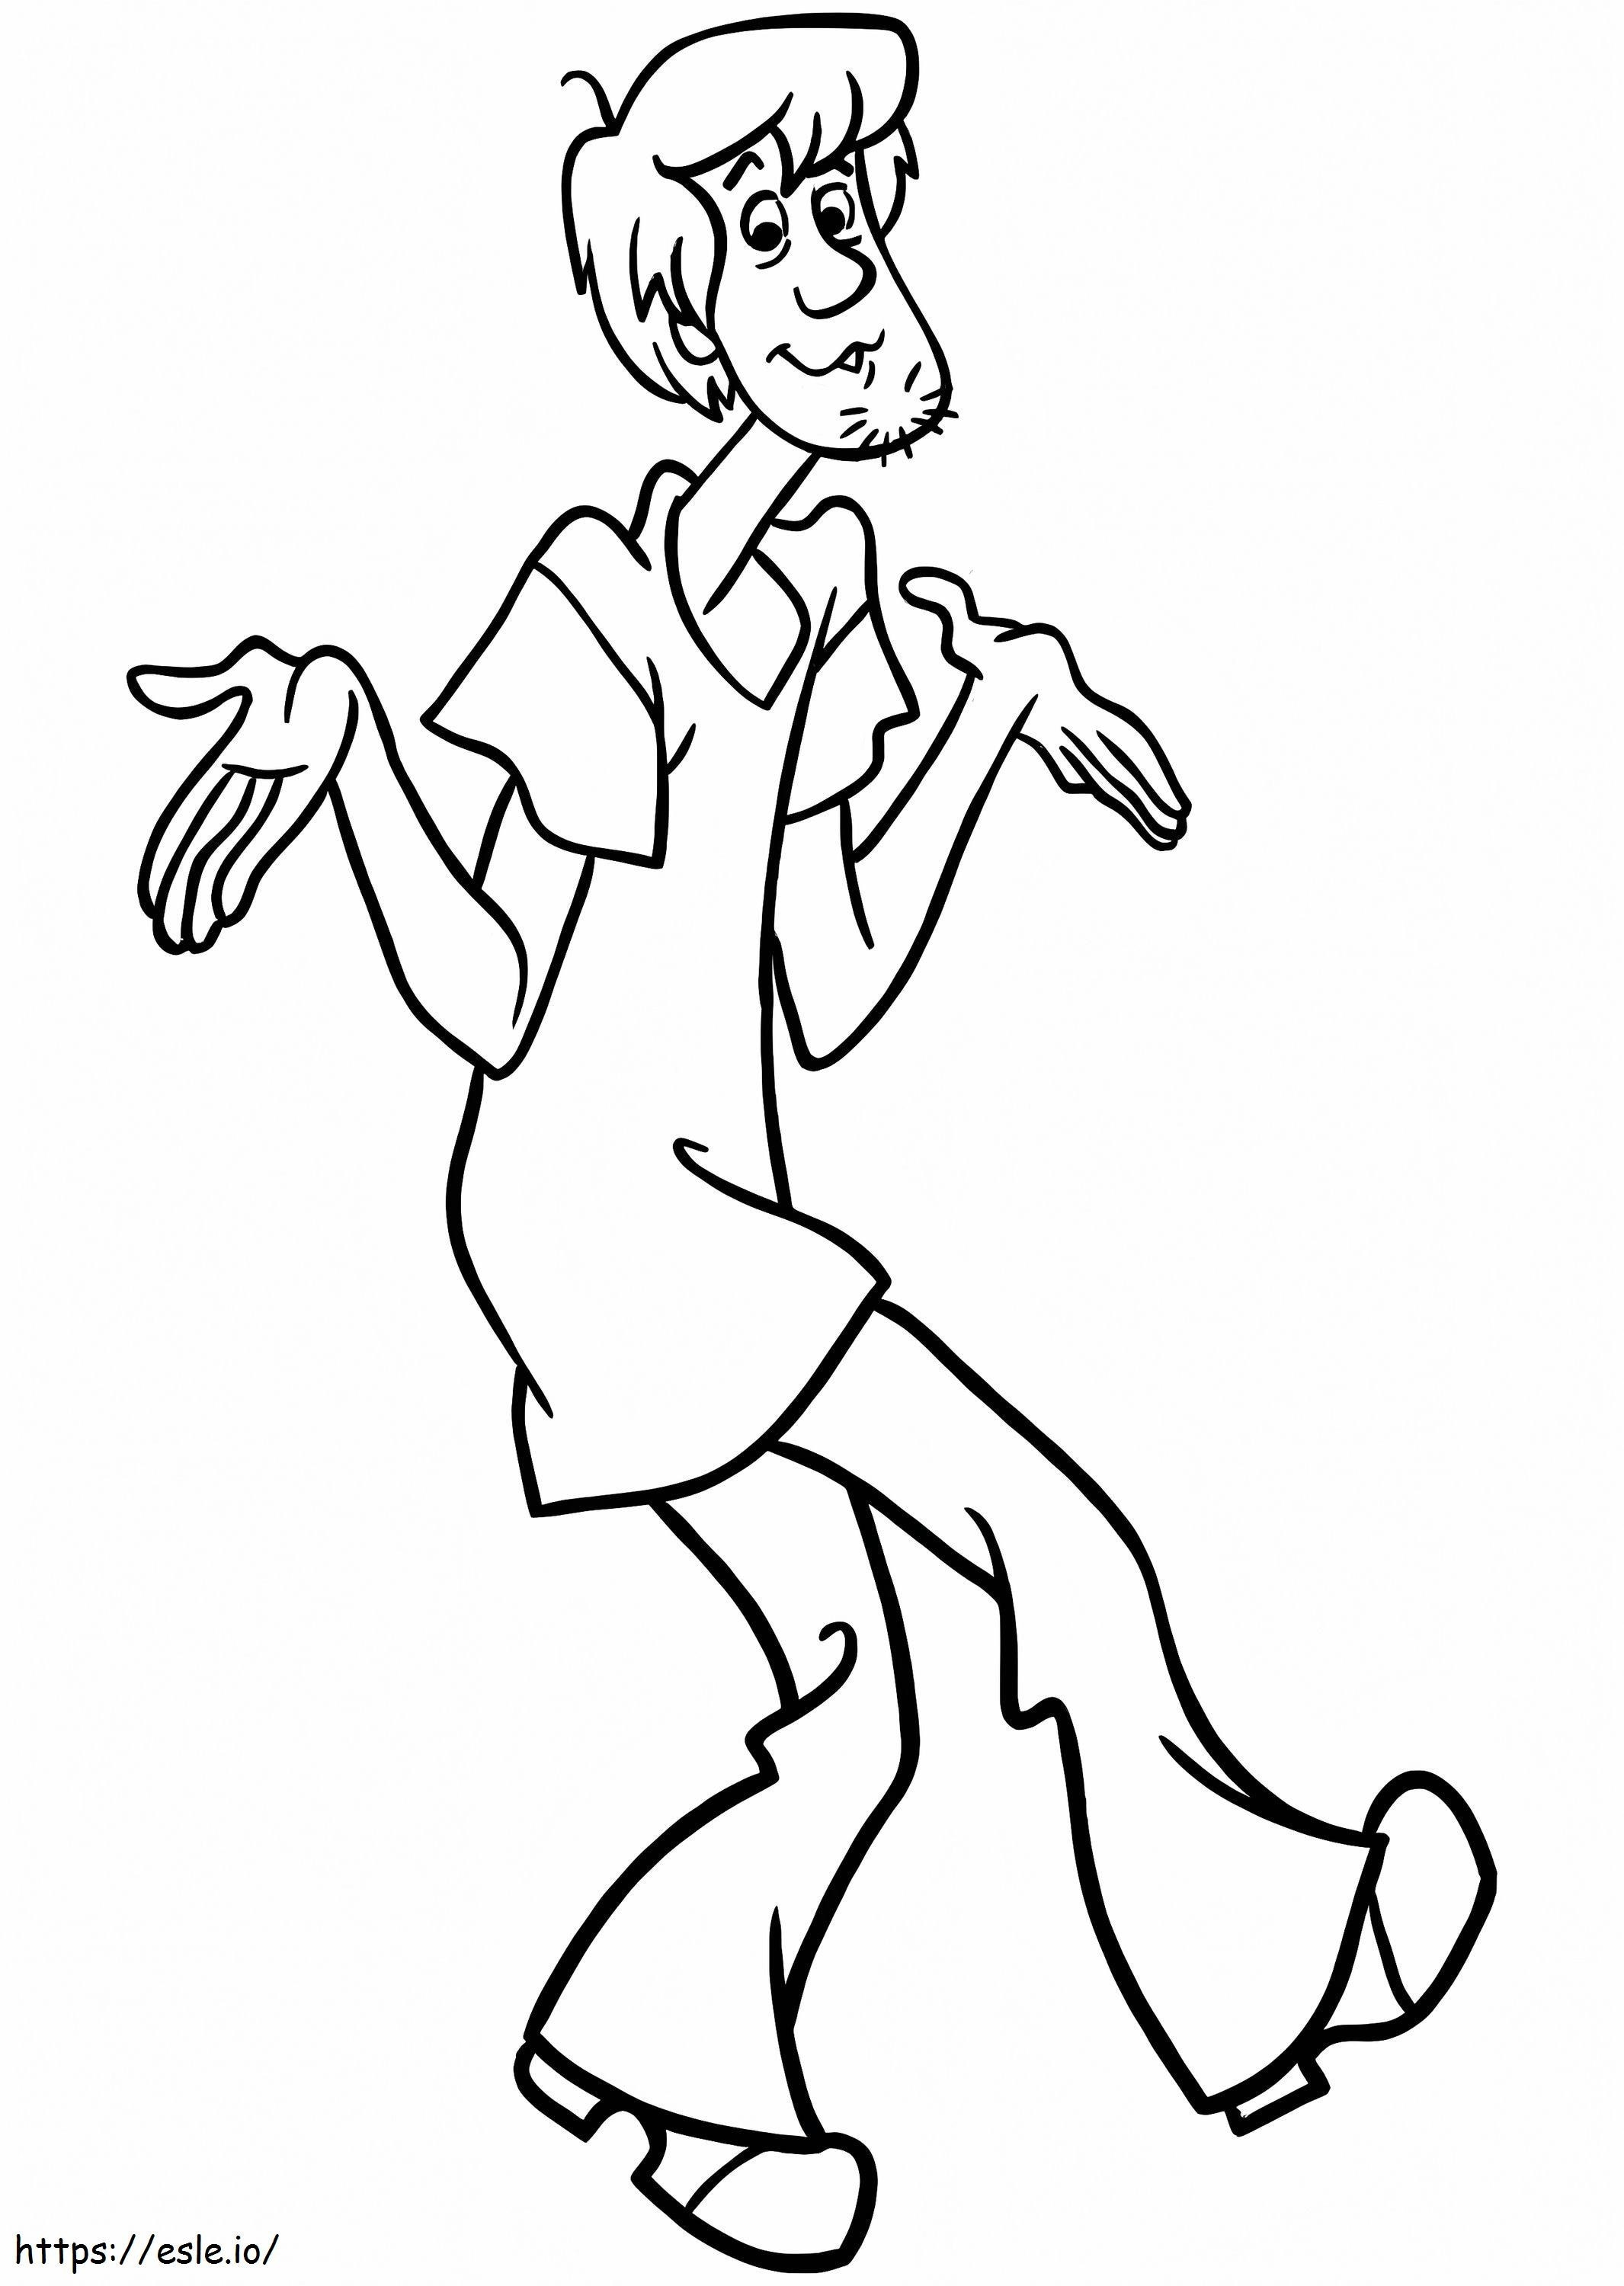 Basic Shaggy coloring page